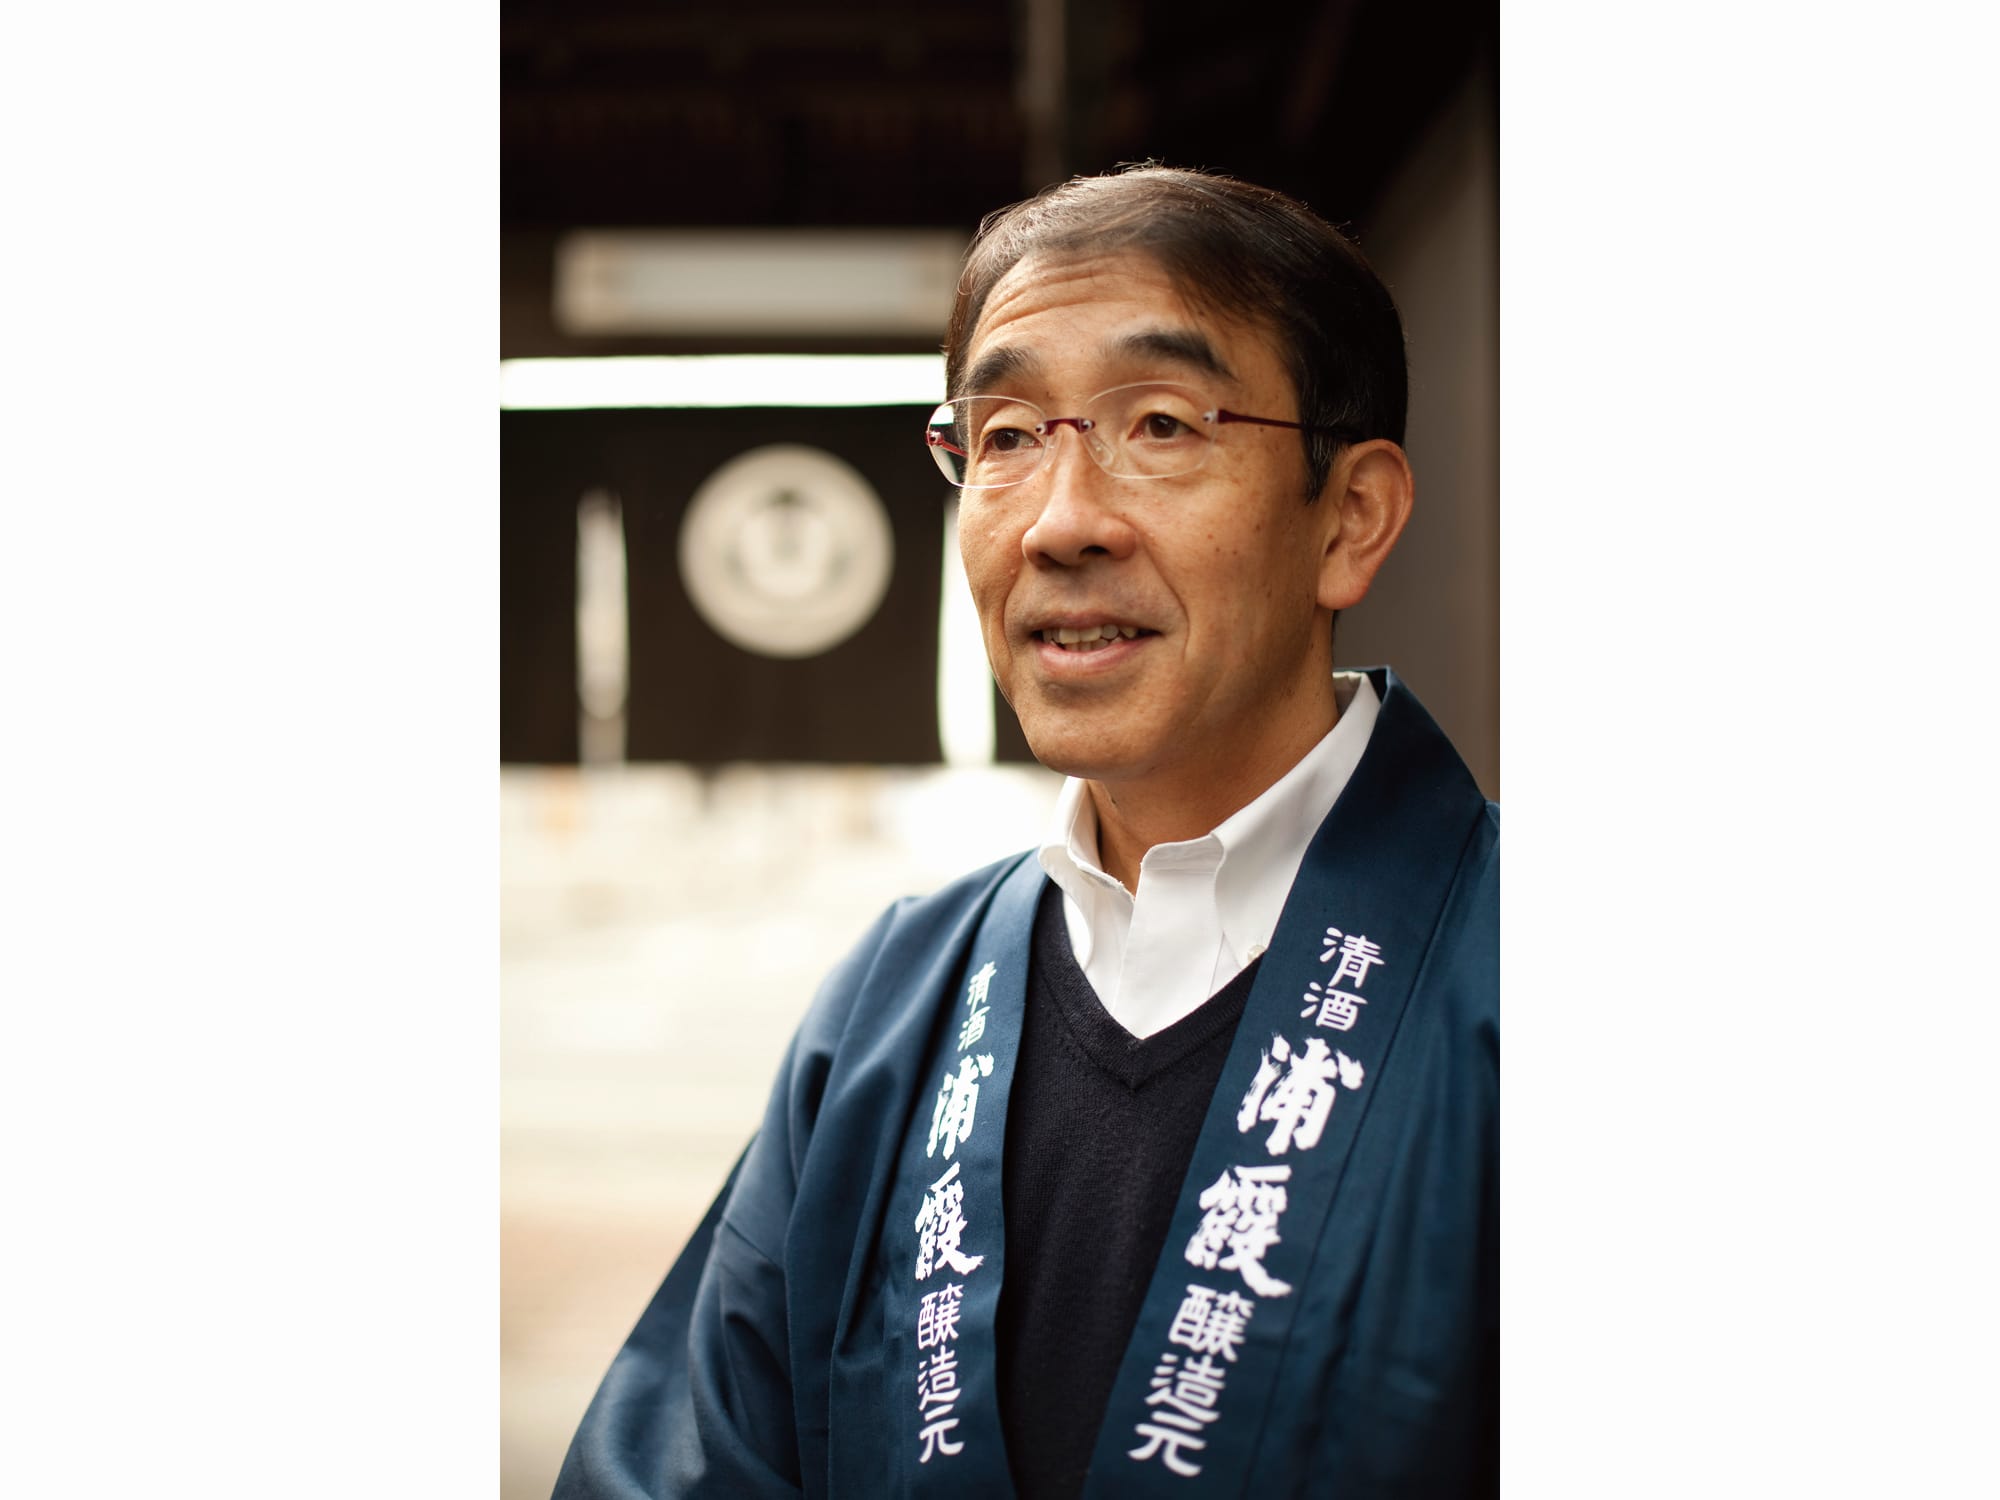 When asked for what Urakasumi was aiming for, the 13th generation and president, Koichi Saura answered, “A genuine sake brewed meticulously, delivered with professionalism. The brewing process is made sincerely and with care to provide our customers the highest quality.”